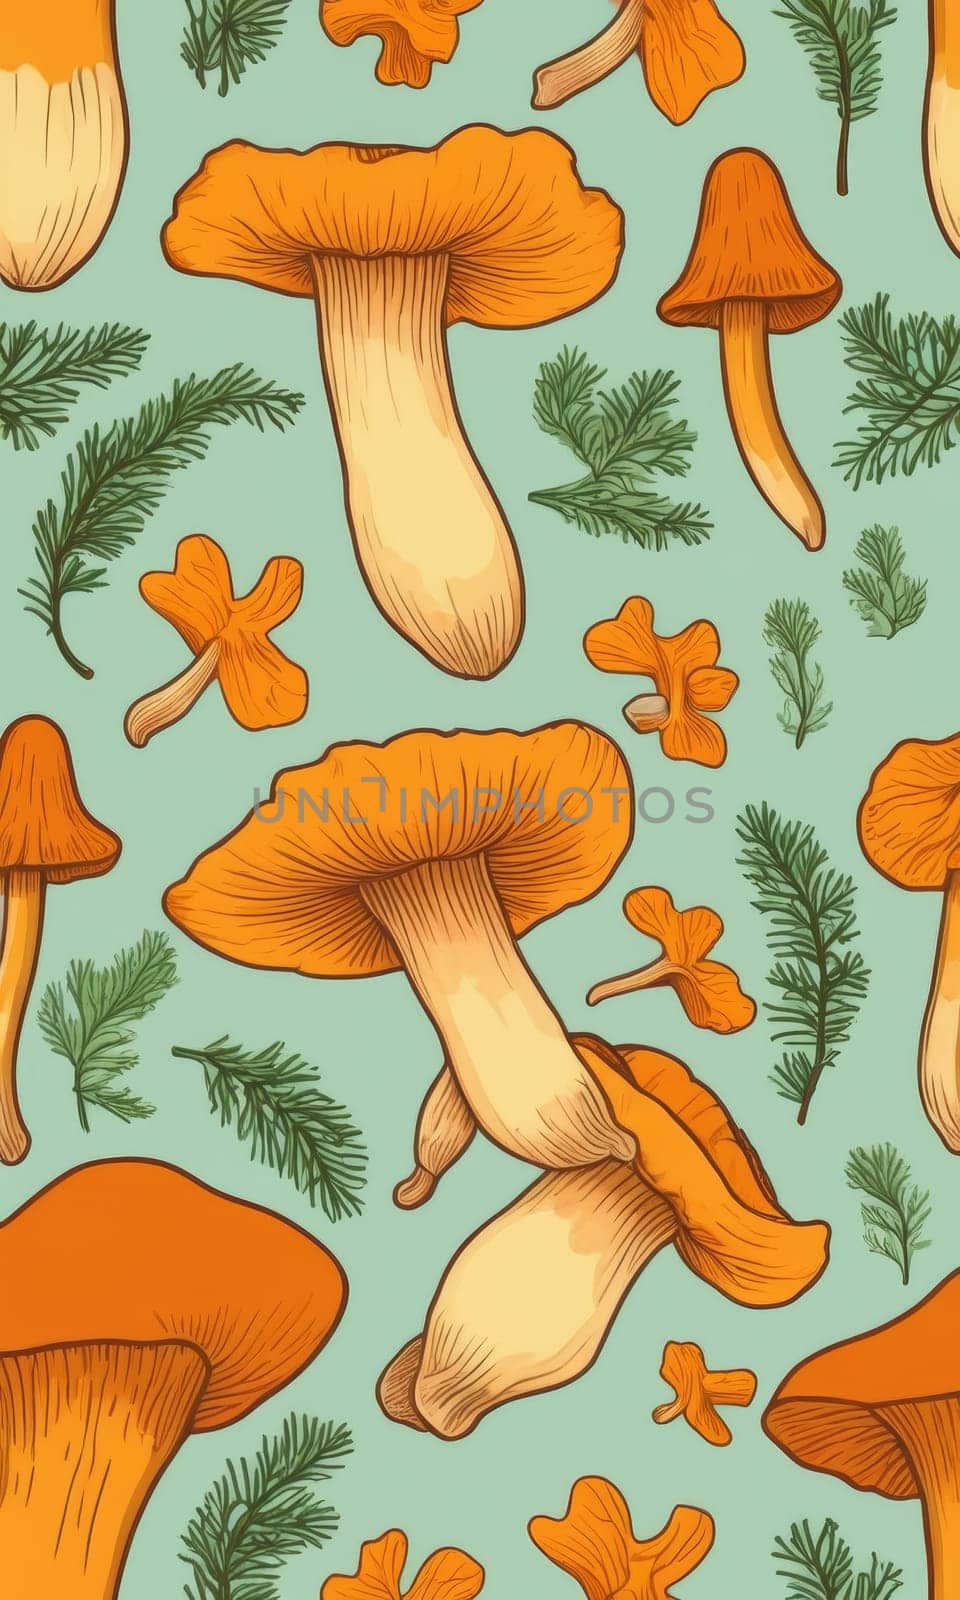 pattern with hand drawn chanterelle mushrooms